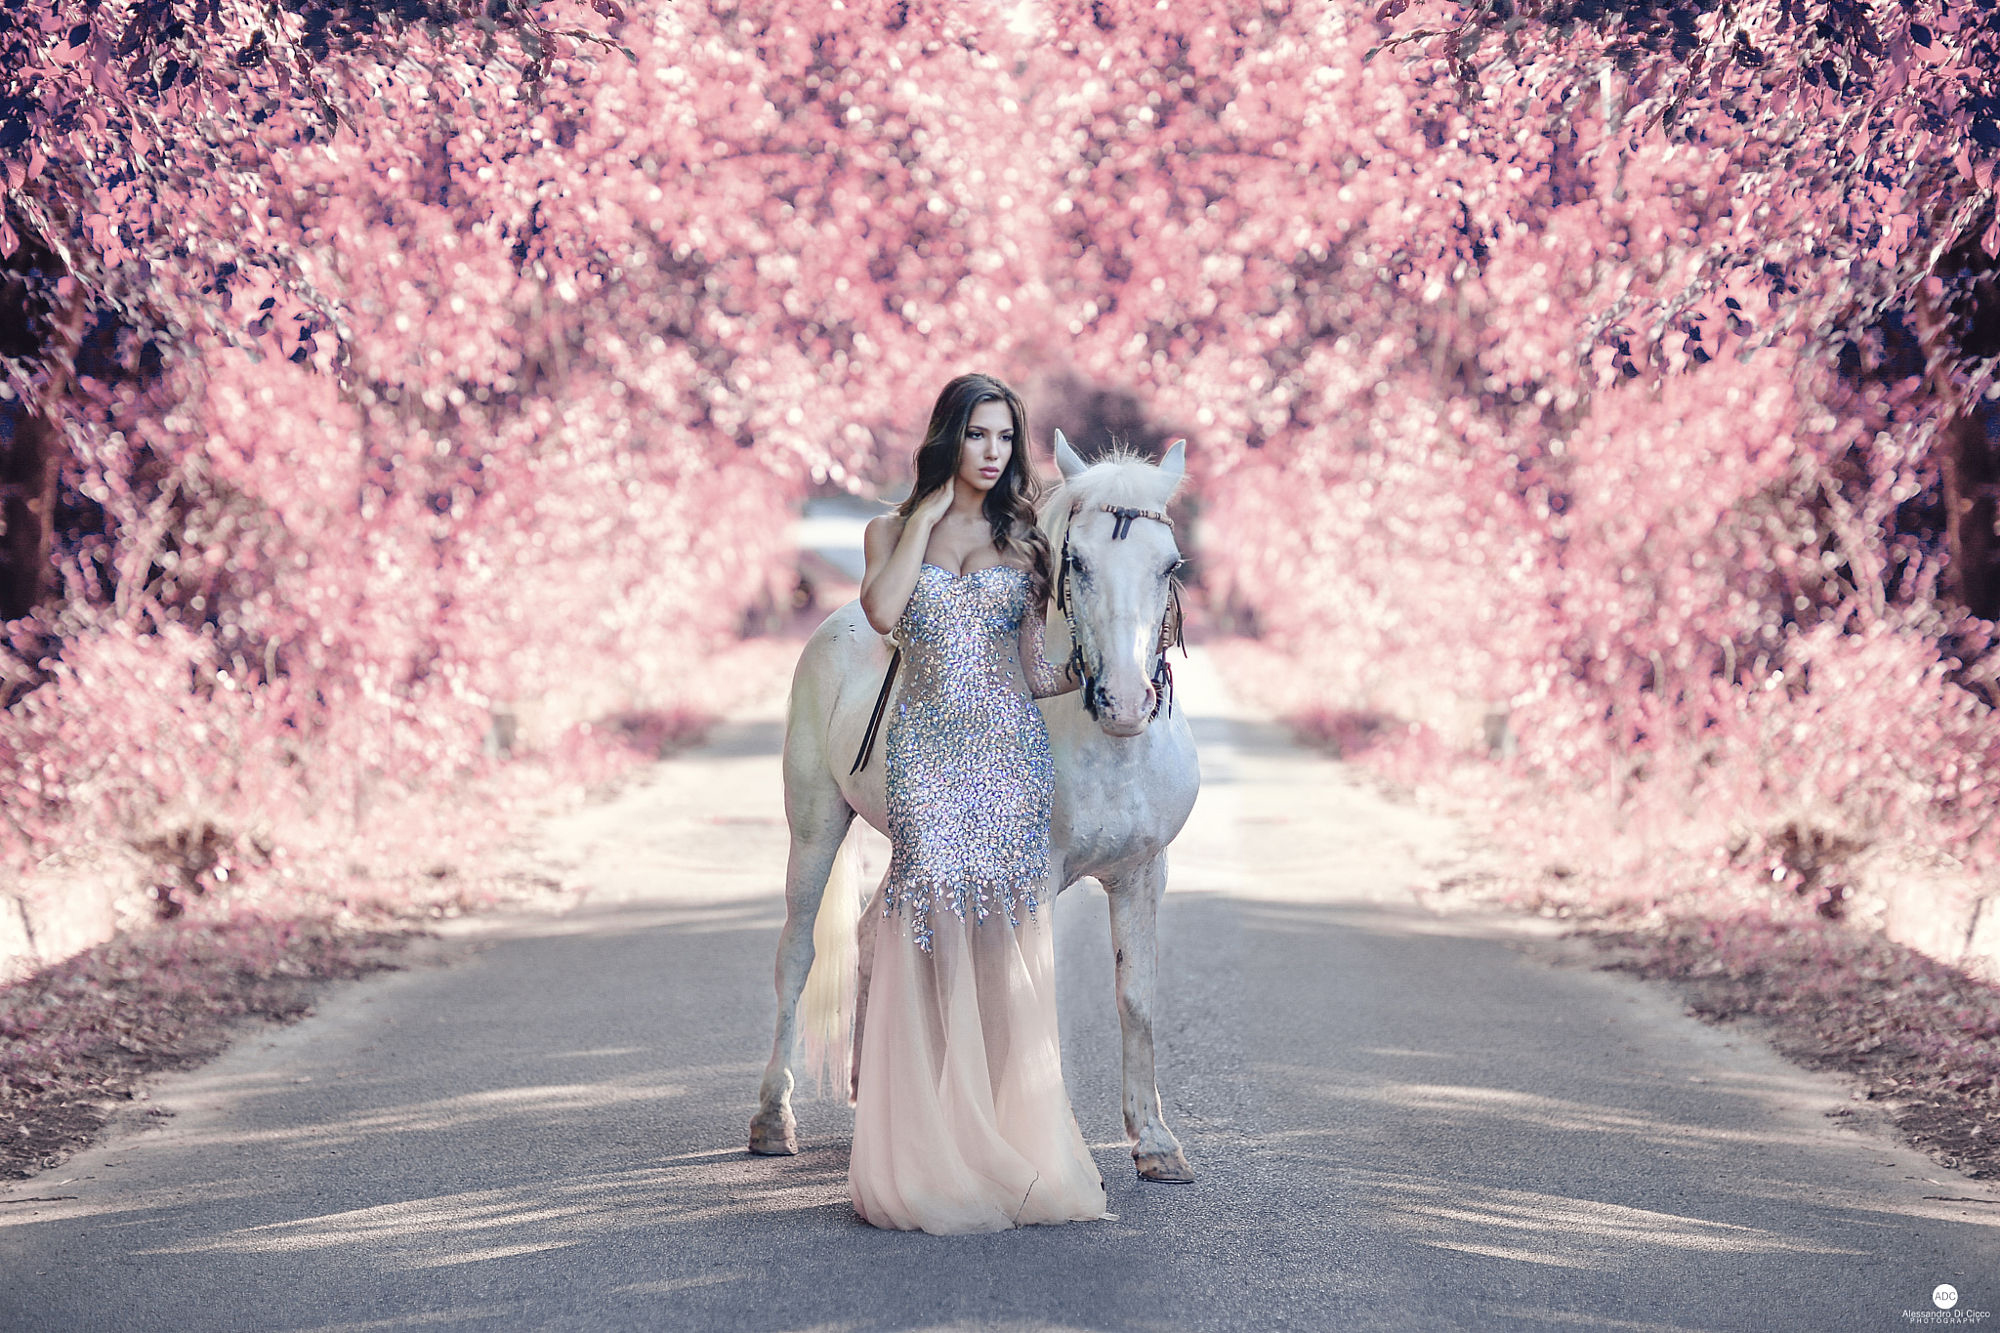 People 2000x1333 women Alessandro Di Cicco brunette long hair dress silver road horse white pink leaves women with horse